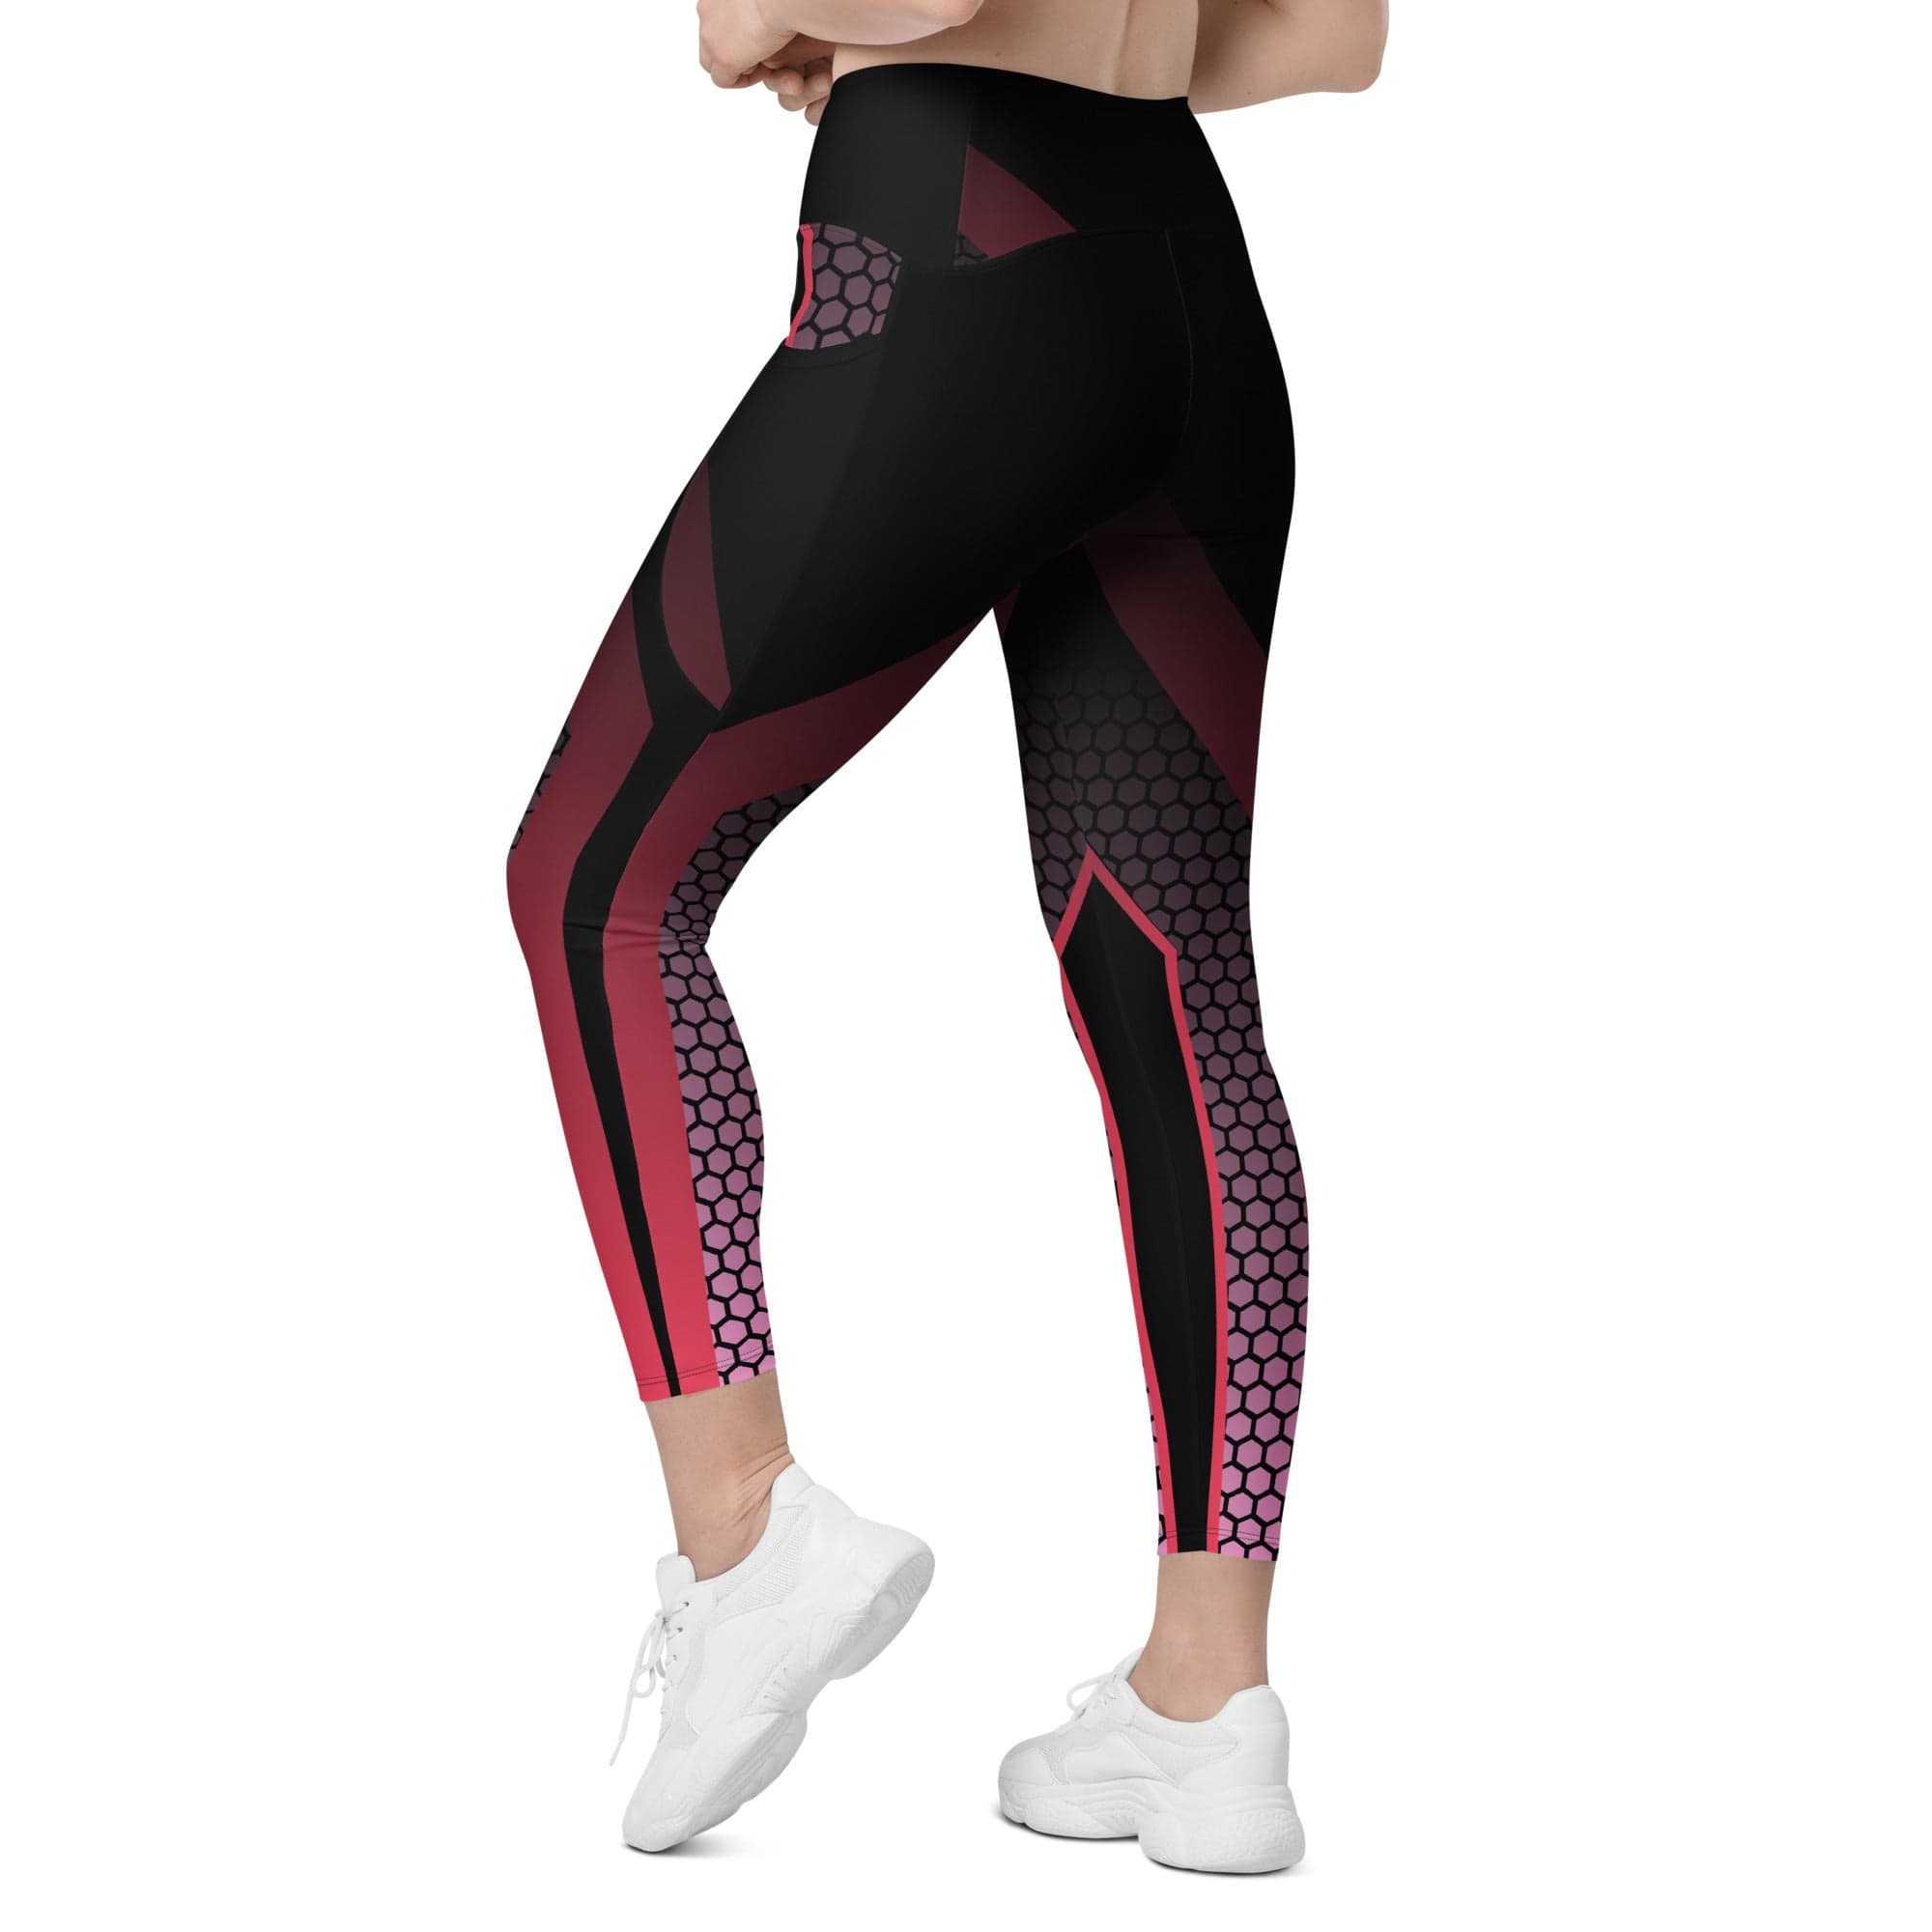 Fire Cornhole Crossover leggings with pockets and hexagon pattern